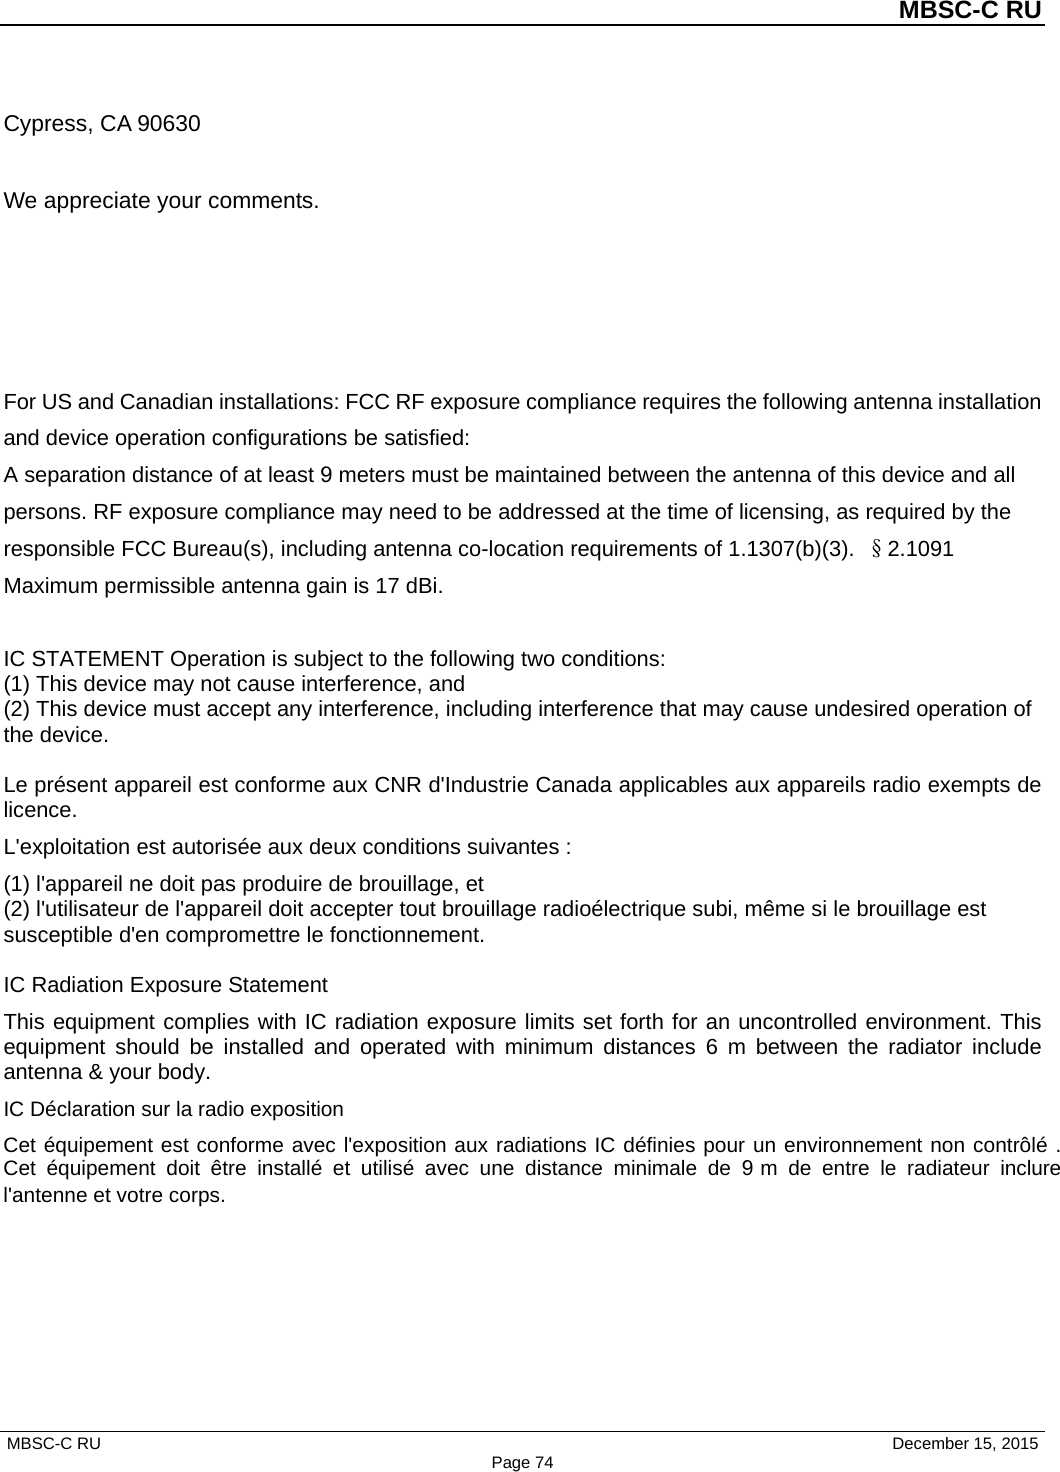 MBSC-C RU MBSC-C RU   December 15, 2015 Page 74Cypress, CA 90630 We appreciate your comments. For US and Canadian installations: FCC RF exposure compliance requires the following antenna installation and device operation configurations be satisfied:  A separation distance of at least 9 meters must be maintained between the antenna of this device and all persons. RF exposure compliance may need to be addressed at the time of licensing, as required by the responsible FCC Bureau(s), including antenna co-location requirements of 1.1307(b)(3). §2.1091 Maximum permissible antenna gain is 17 dBi. IC STATEMENT Operation is subject to the following two conditions:   (1) This device may not cause interference, and   (2) This device must accept any interference, including interference that may cause undesired operation of the device.   Le présent appareil est conforme aux CNR d&apos;Industrie Canada applicables aux appareils radio exempts de licence.   L&apos;exploitation est autorisée aux deux conditions suivantes : (1) l&apos;appareil ne doit pas produire de brouillage, et   (2) l&apos;utilisateur de l&apos;appareil doit accepter tout brouillage radioélectrique subi, même si le brouillage est susceptible d&apos;en compromettre le fonctionnement.   IC Radiation Exposure Statement This equipment complies with IC radiation exposure limits set forth for an uncontrolled environment. This equipment should be installed and operated with minimum distances 6  m between the radiator include antenna &amp; your body.   IC Déclaration sur la radio exposition Cet équipement est conforme avec l&apos;exposition aux radiations IC définies pour un environnement non contrôlé . Cet équipement doit être installé et utilisé avec une distance minimale de 9 m de entre le radiateur inclure l&apos;antenne et votre corps.  